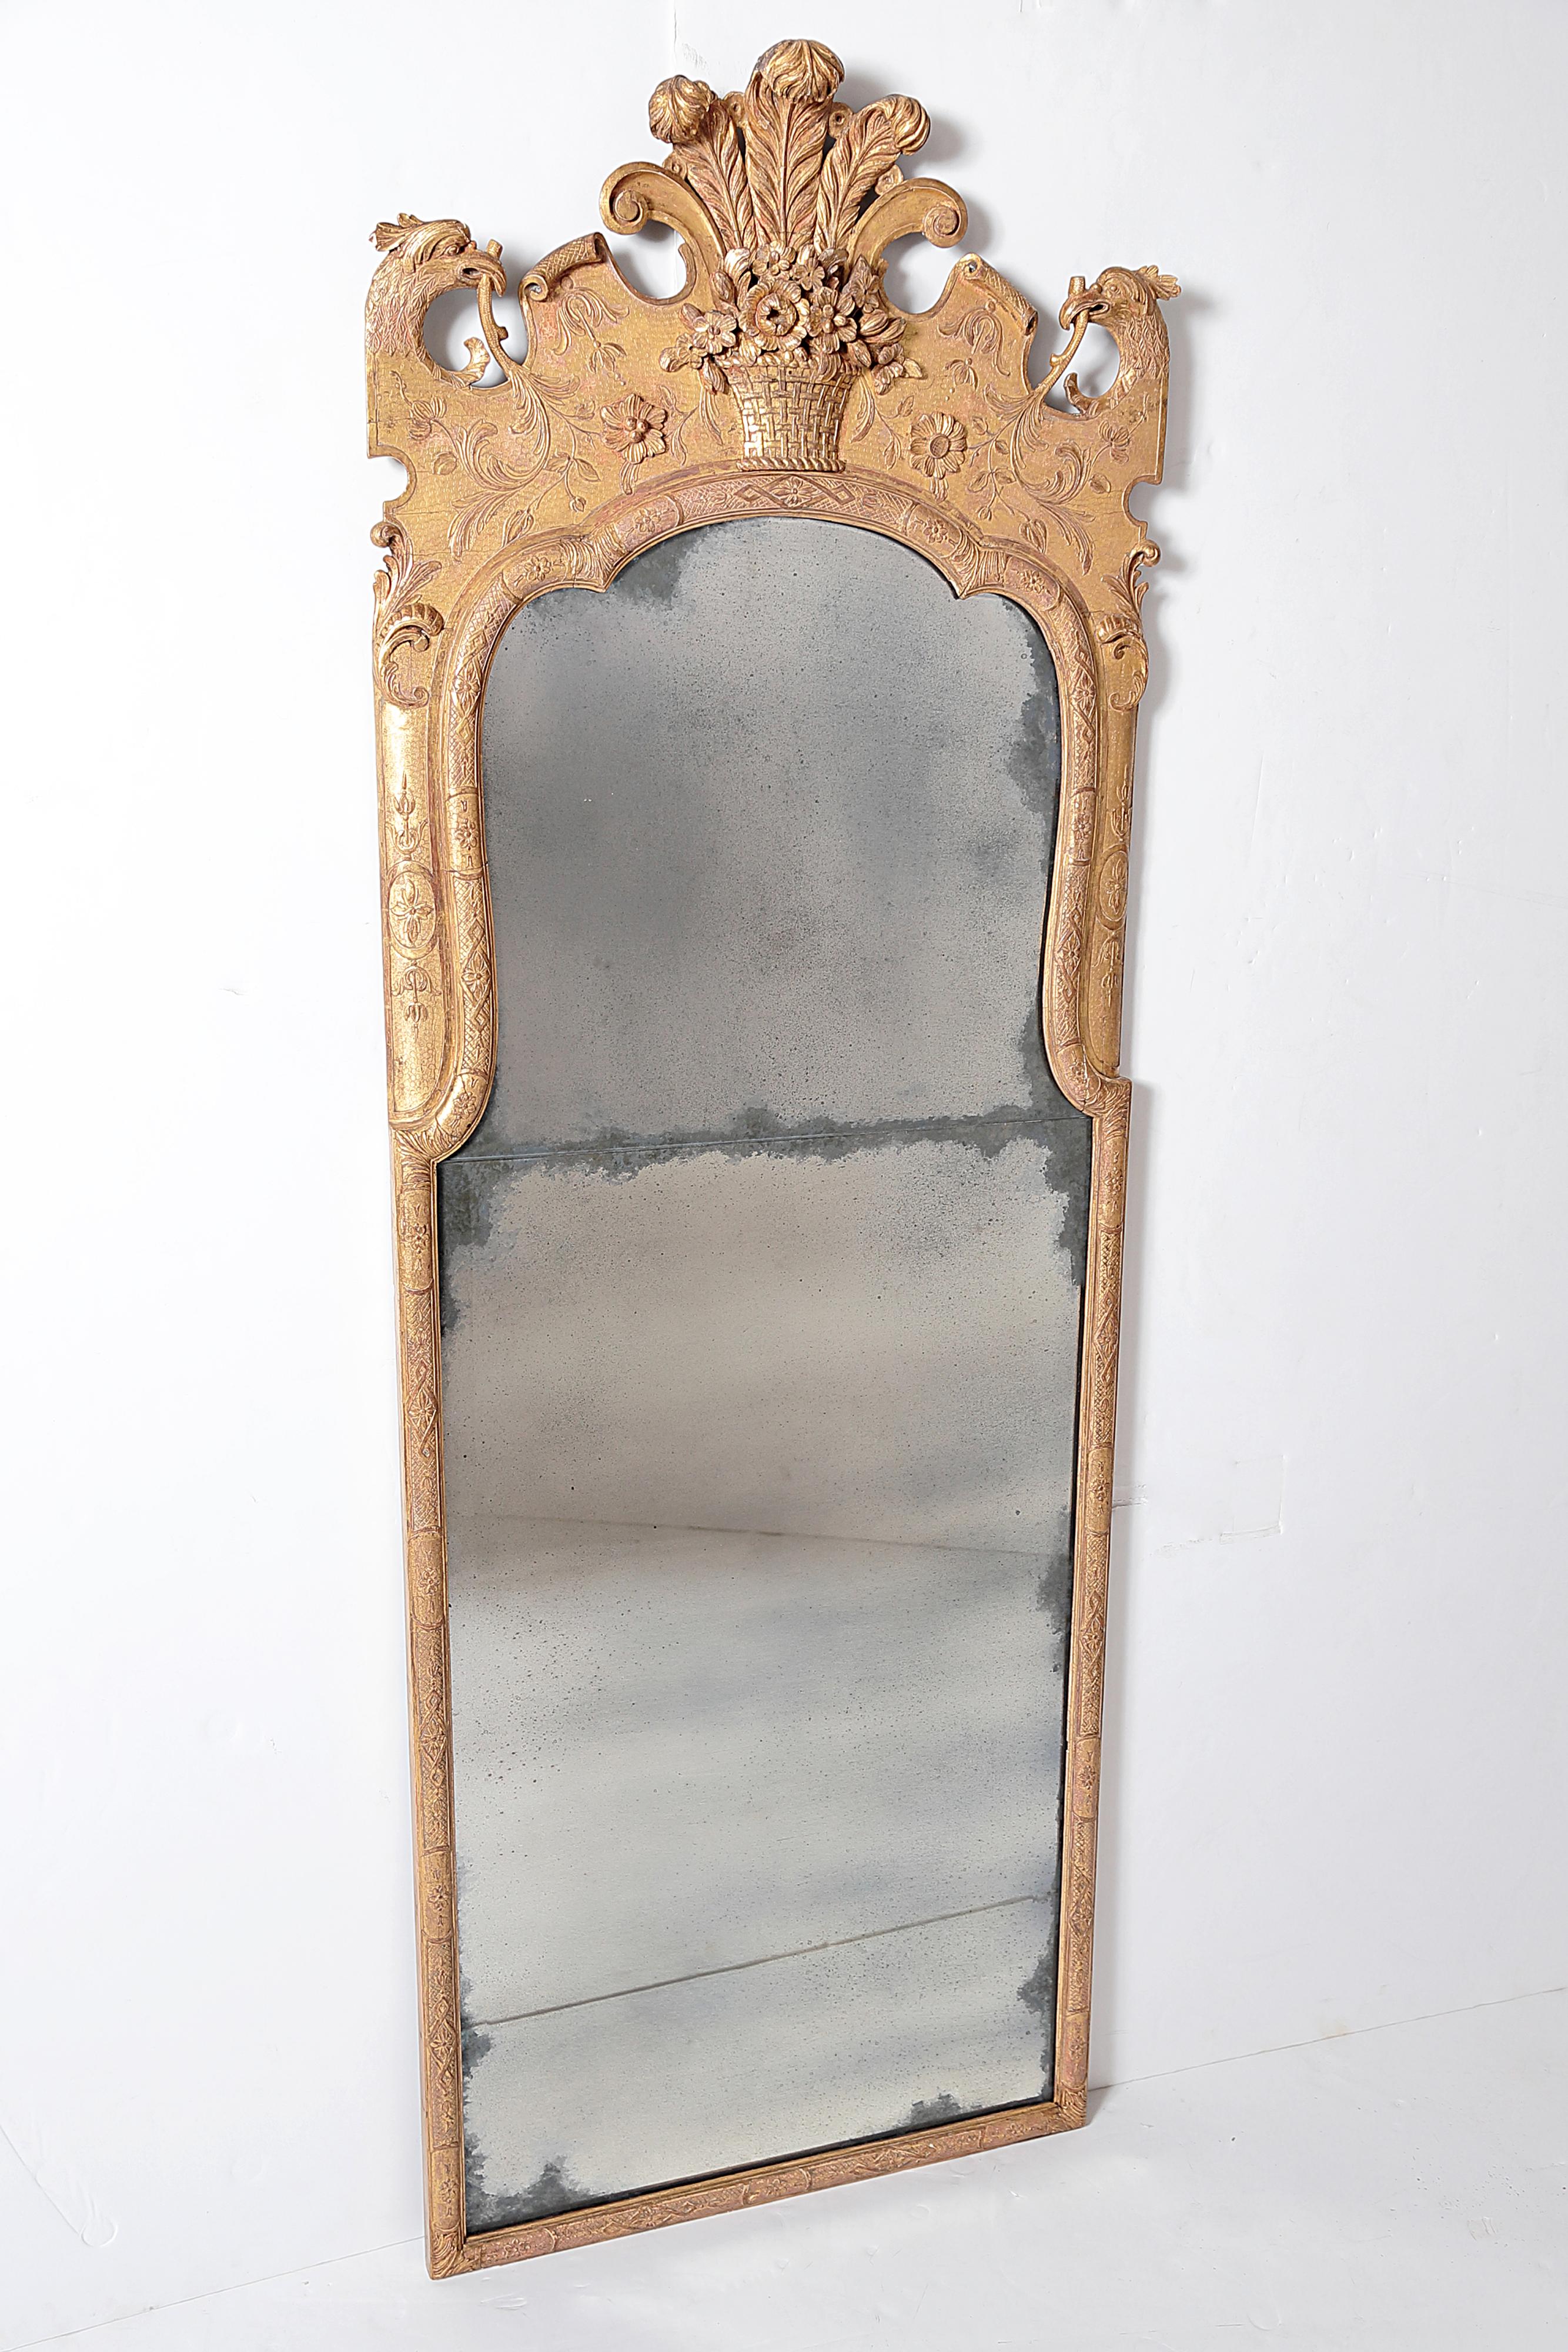 Queen Anne-style Pier Glass by Westing, Evans & Egmore, Philidelphia, PA 1